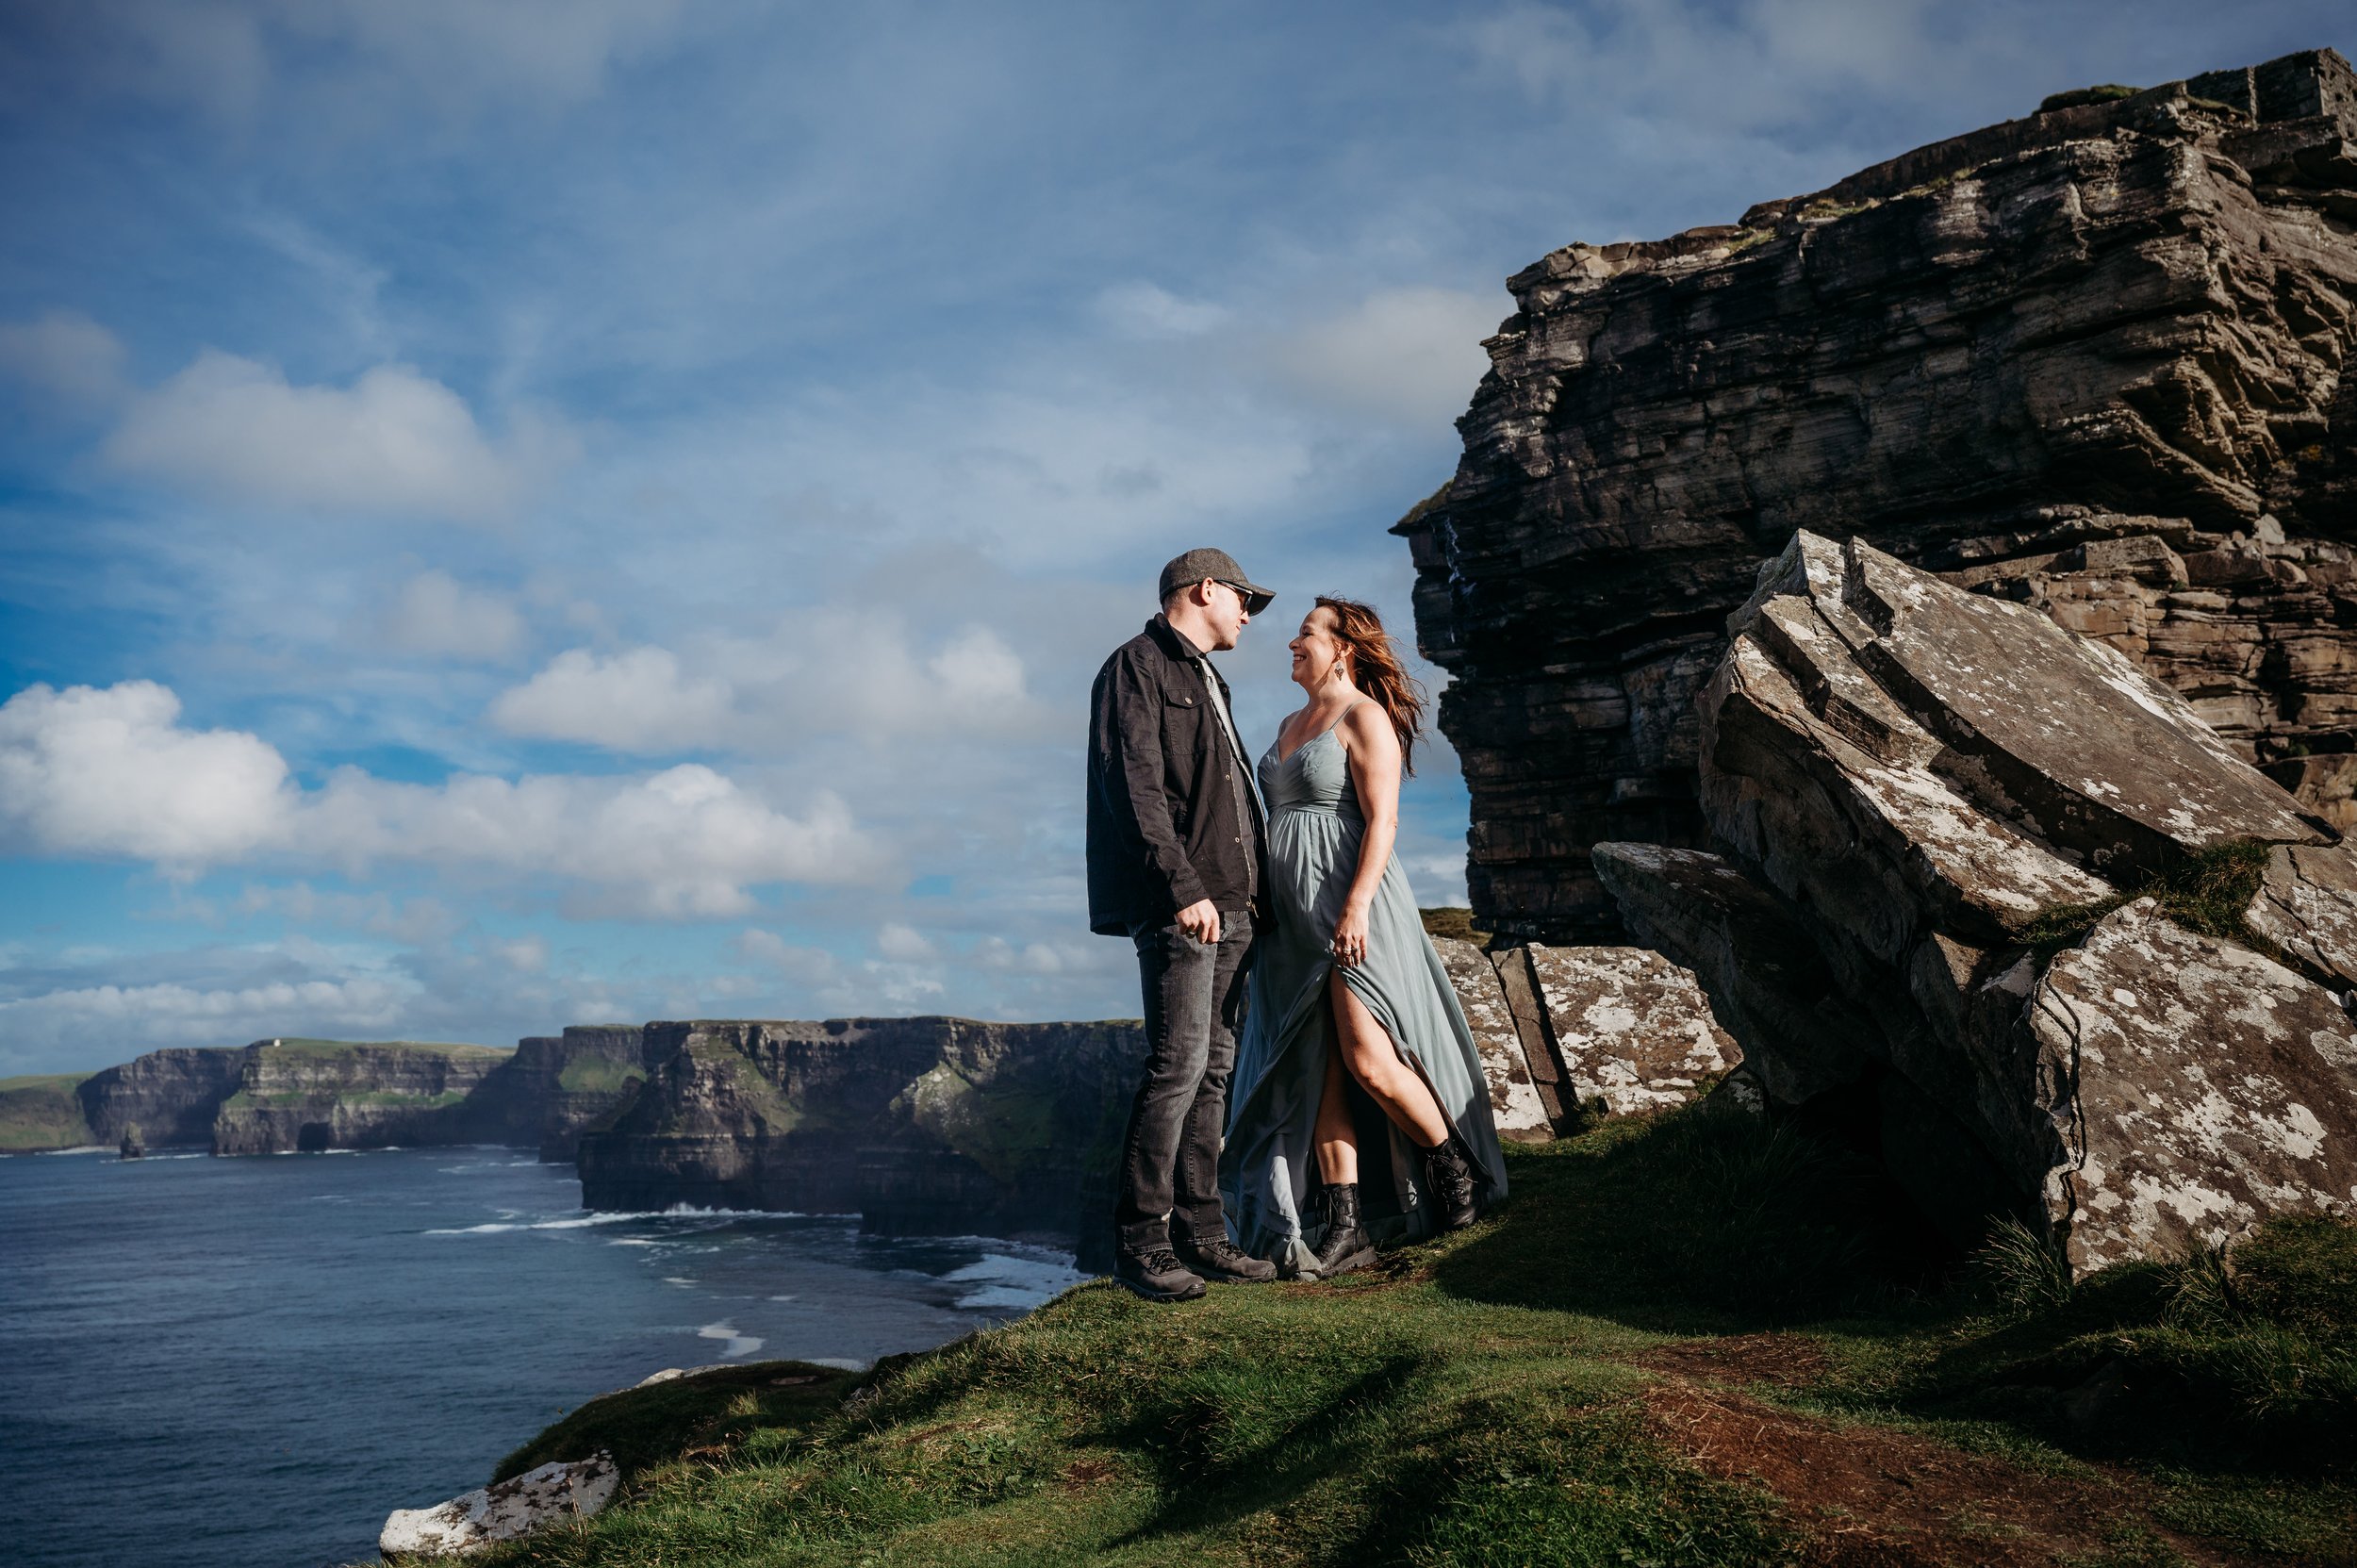 Marie O'Mahony photographer Cliffs of Moher anniversary couples photo session cliffs in the background